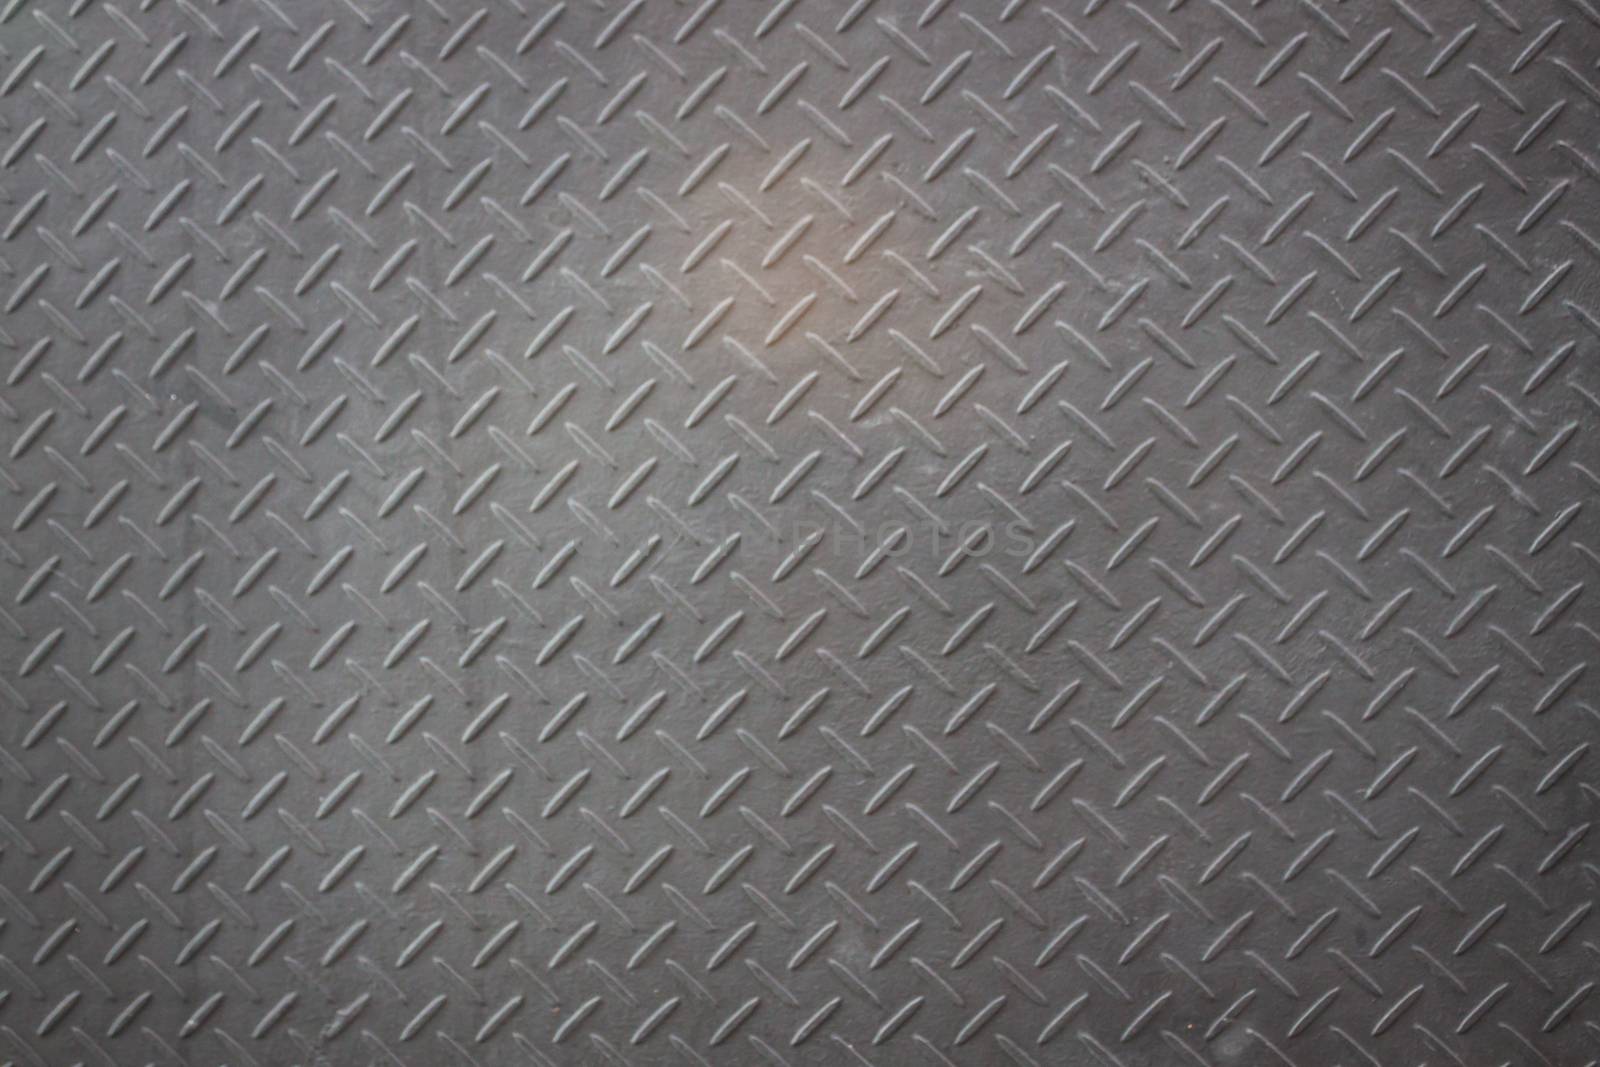 Black metal plate texture background, stock photo